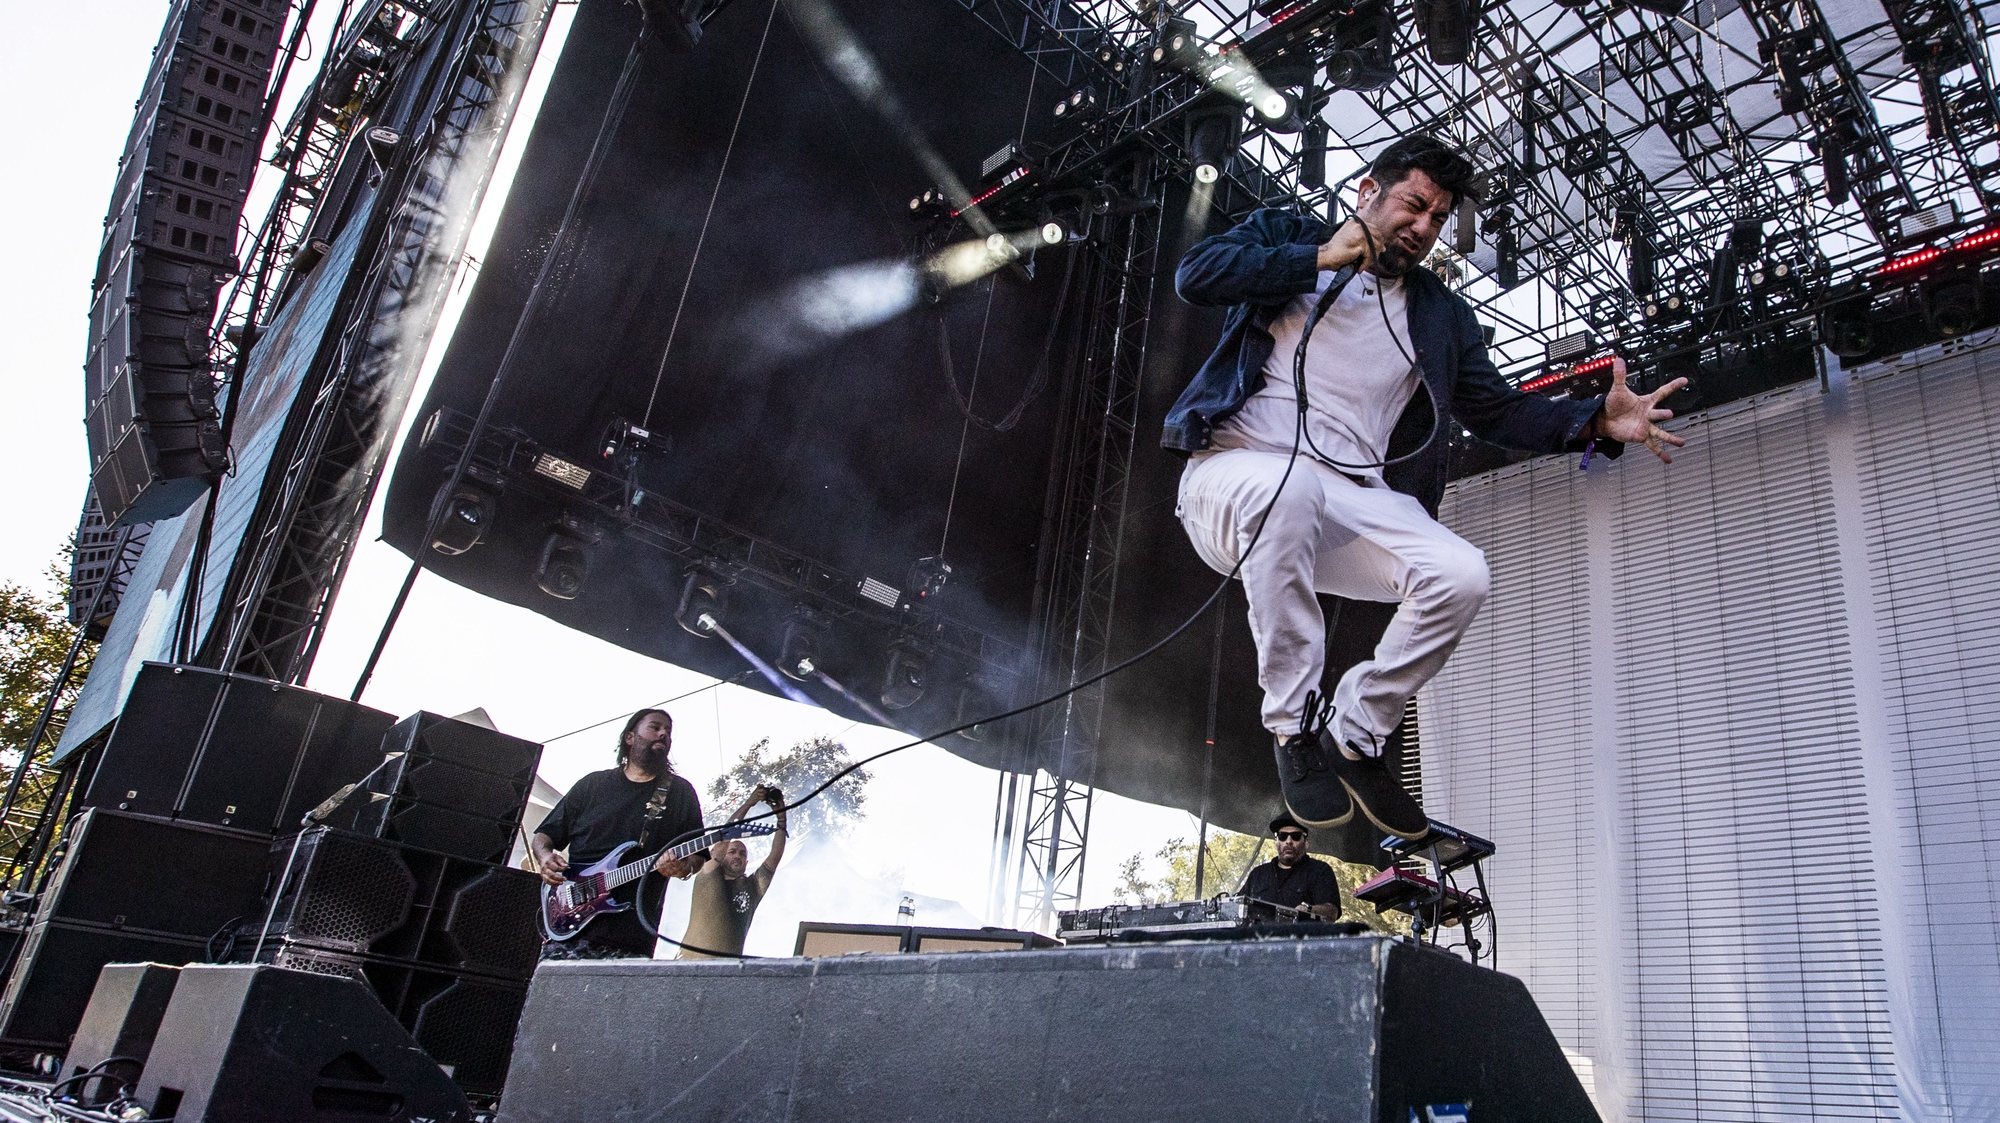 epa07808913 Chino Moreno of the Deftones performs on stage during the Daydream Festival at the Rose Bowl in Pasadena, California, USA, 31 August 2019. The festival only runs for one day.  EPA/ETIENNE LAURENT